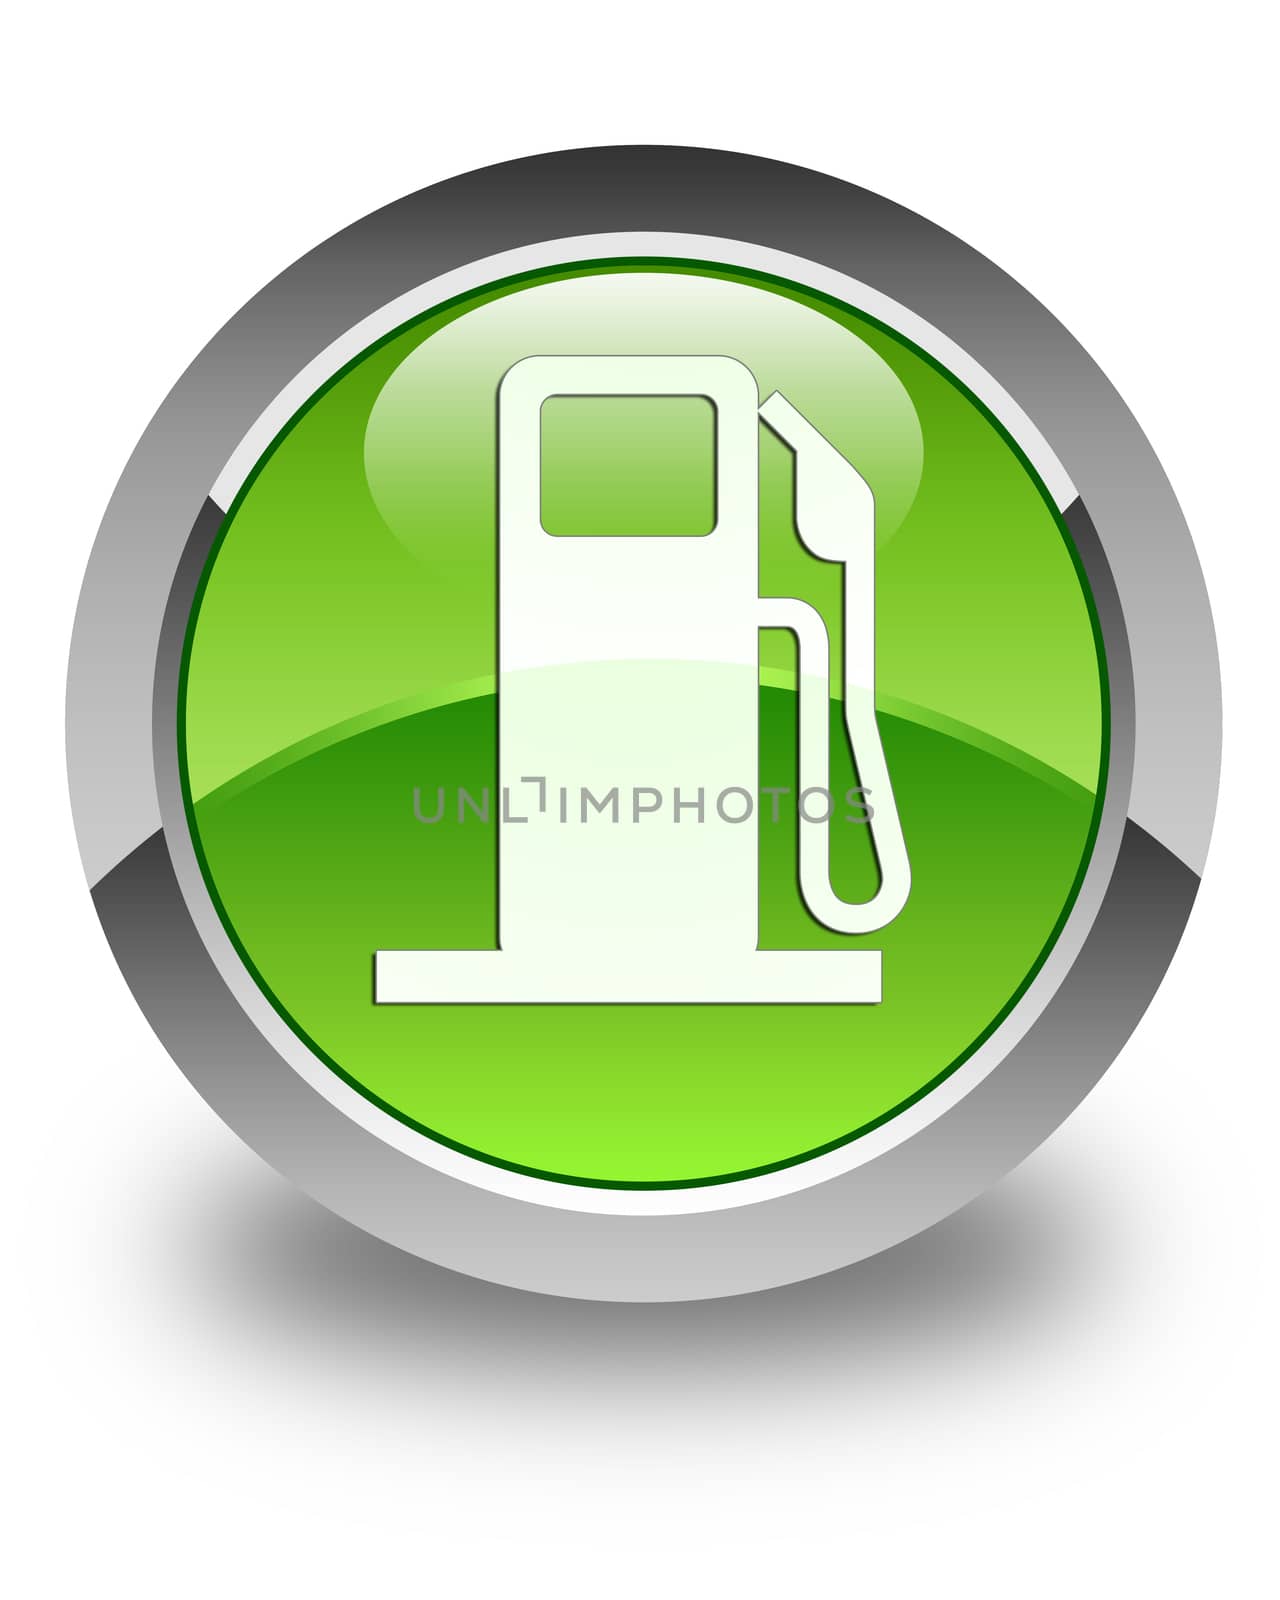 Pump station icon on glossy green round button